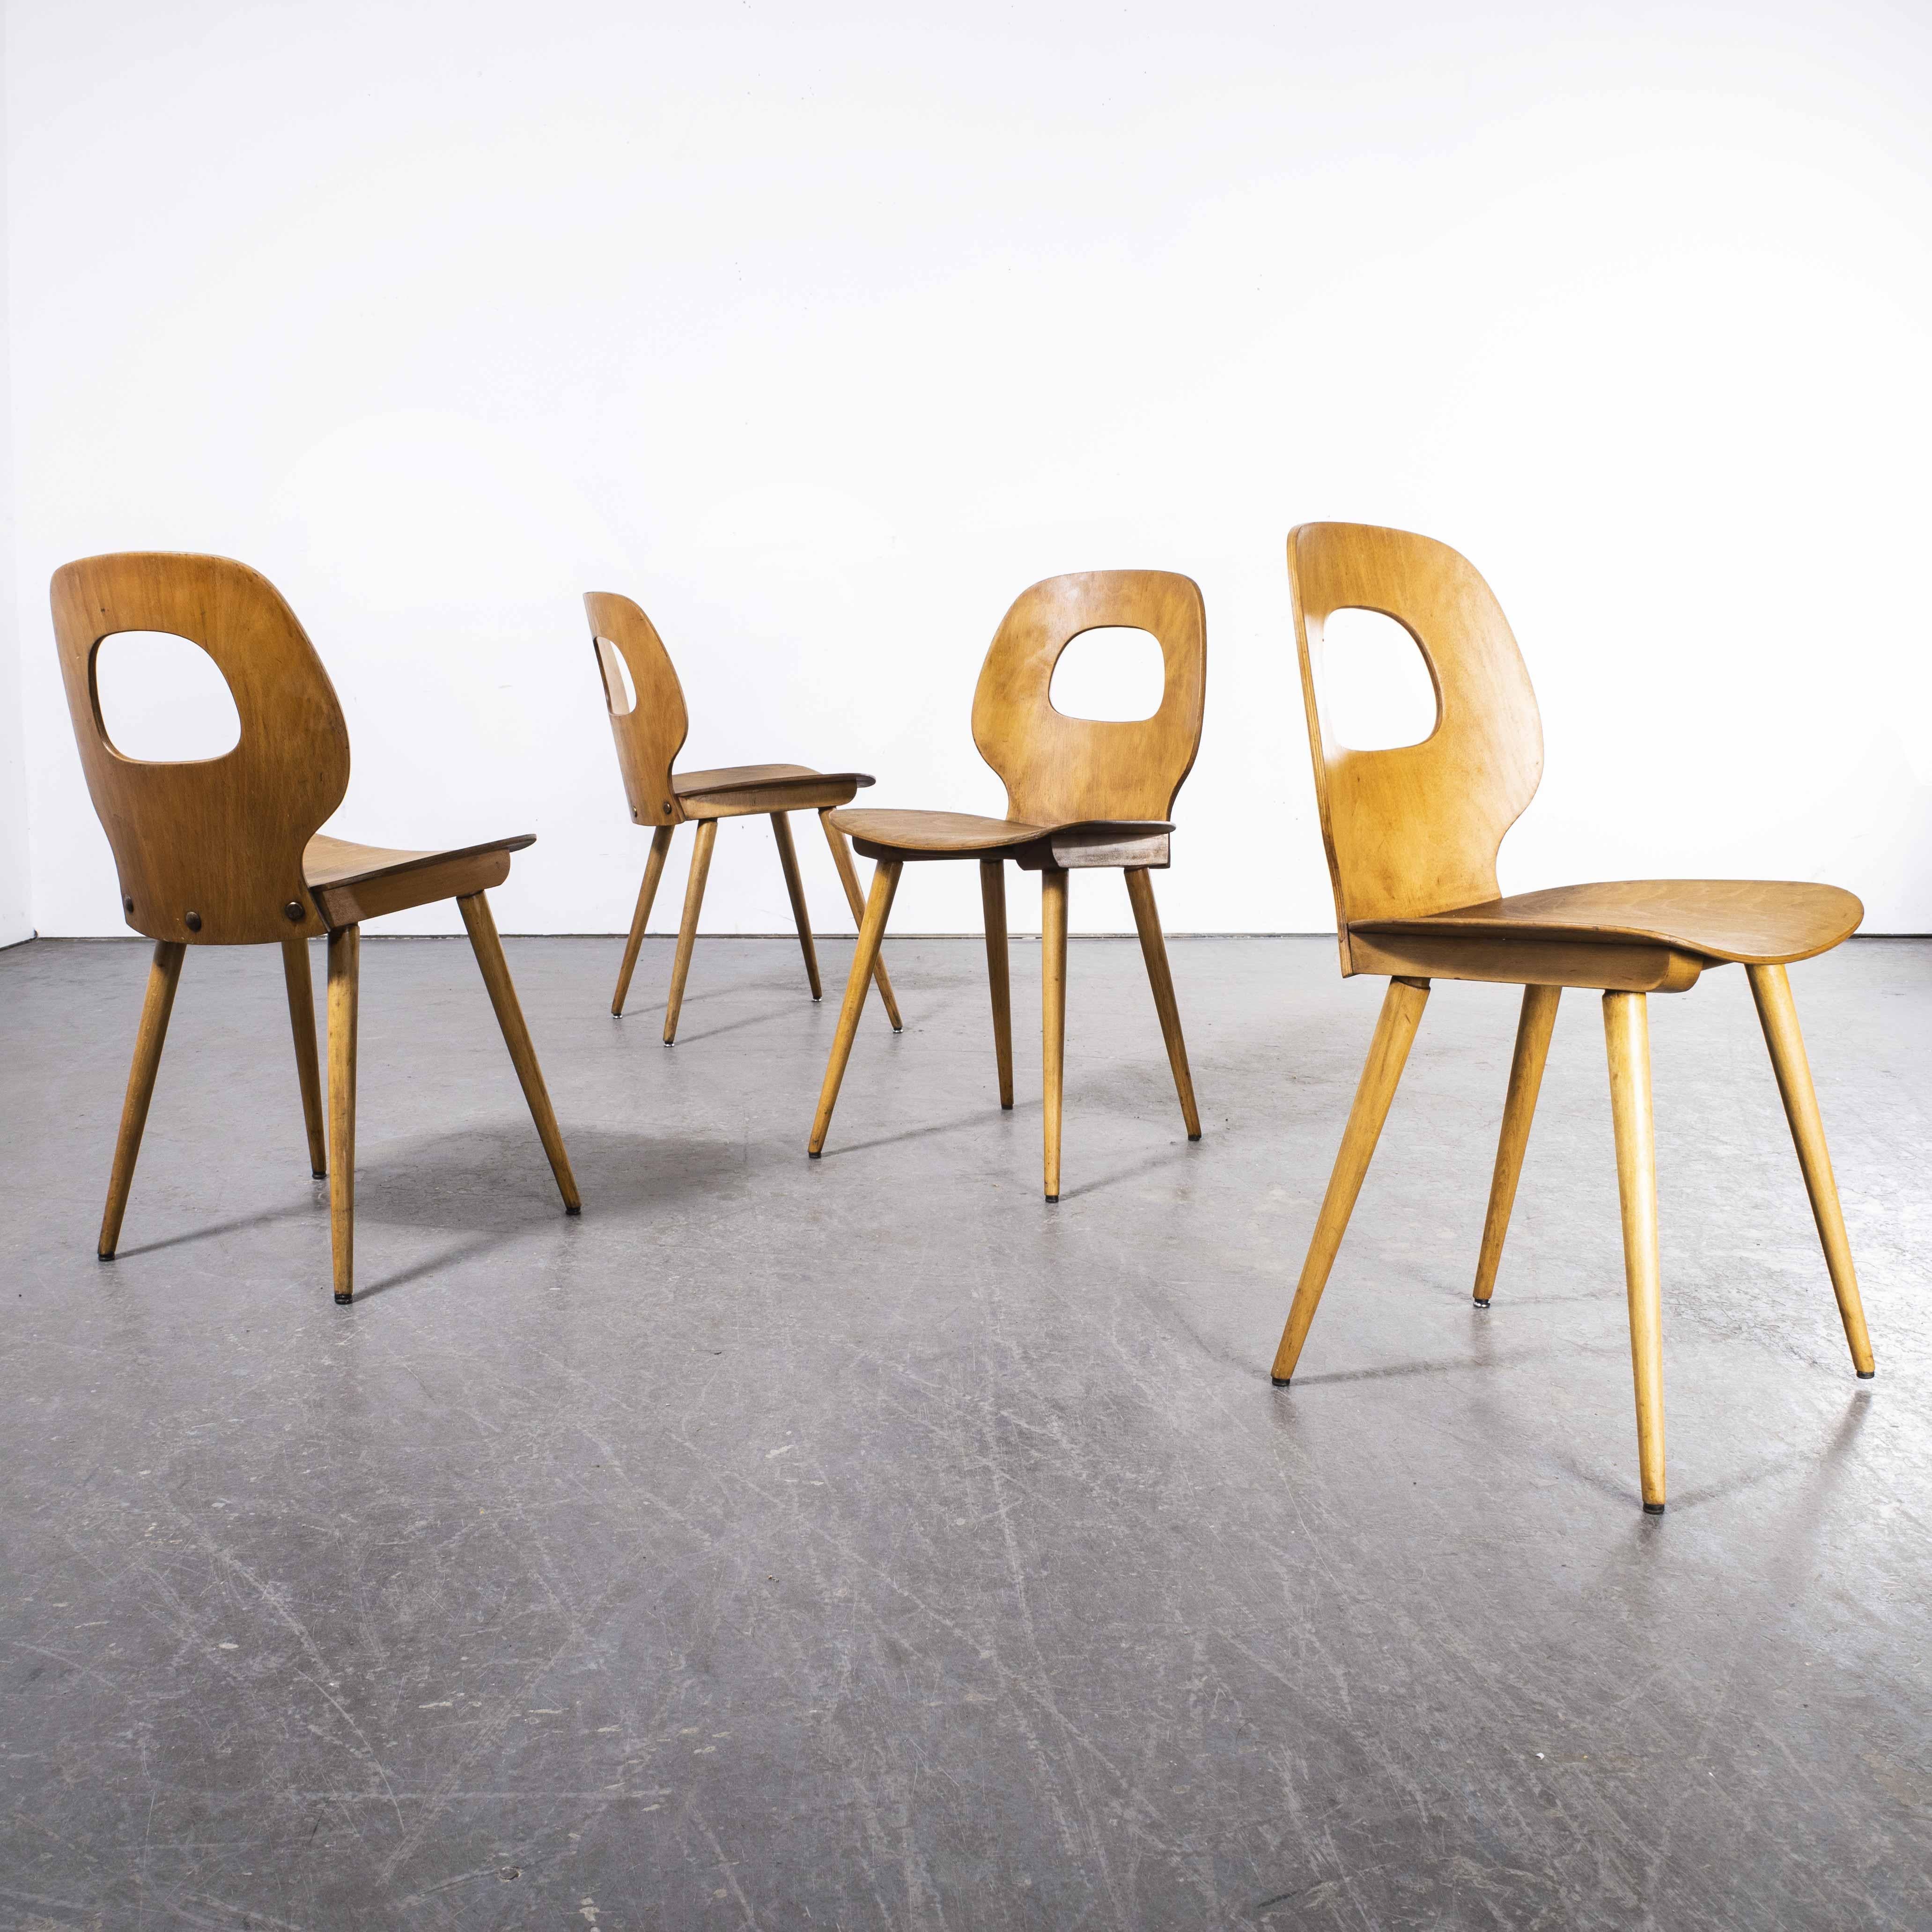 1950’s French Baumann Oeil dining chair – set of four
1950’s French Baumann Oeil dining chair – set of four. Baumann is a slightly off the radar French producer just starting to gain traction in the market. Baumann was founded in 1901, by Swiss man